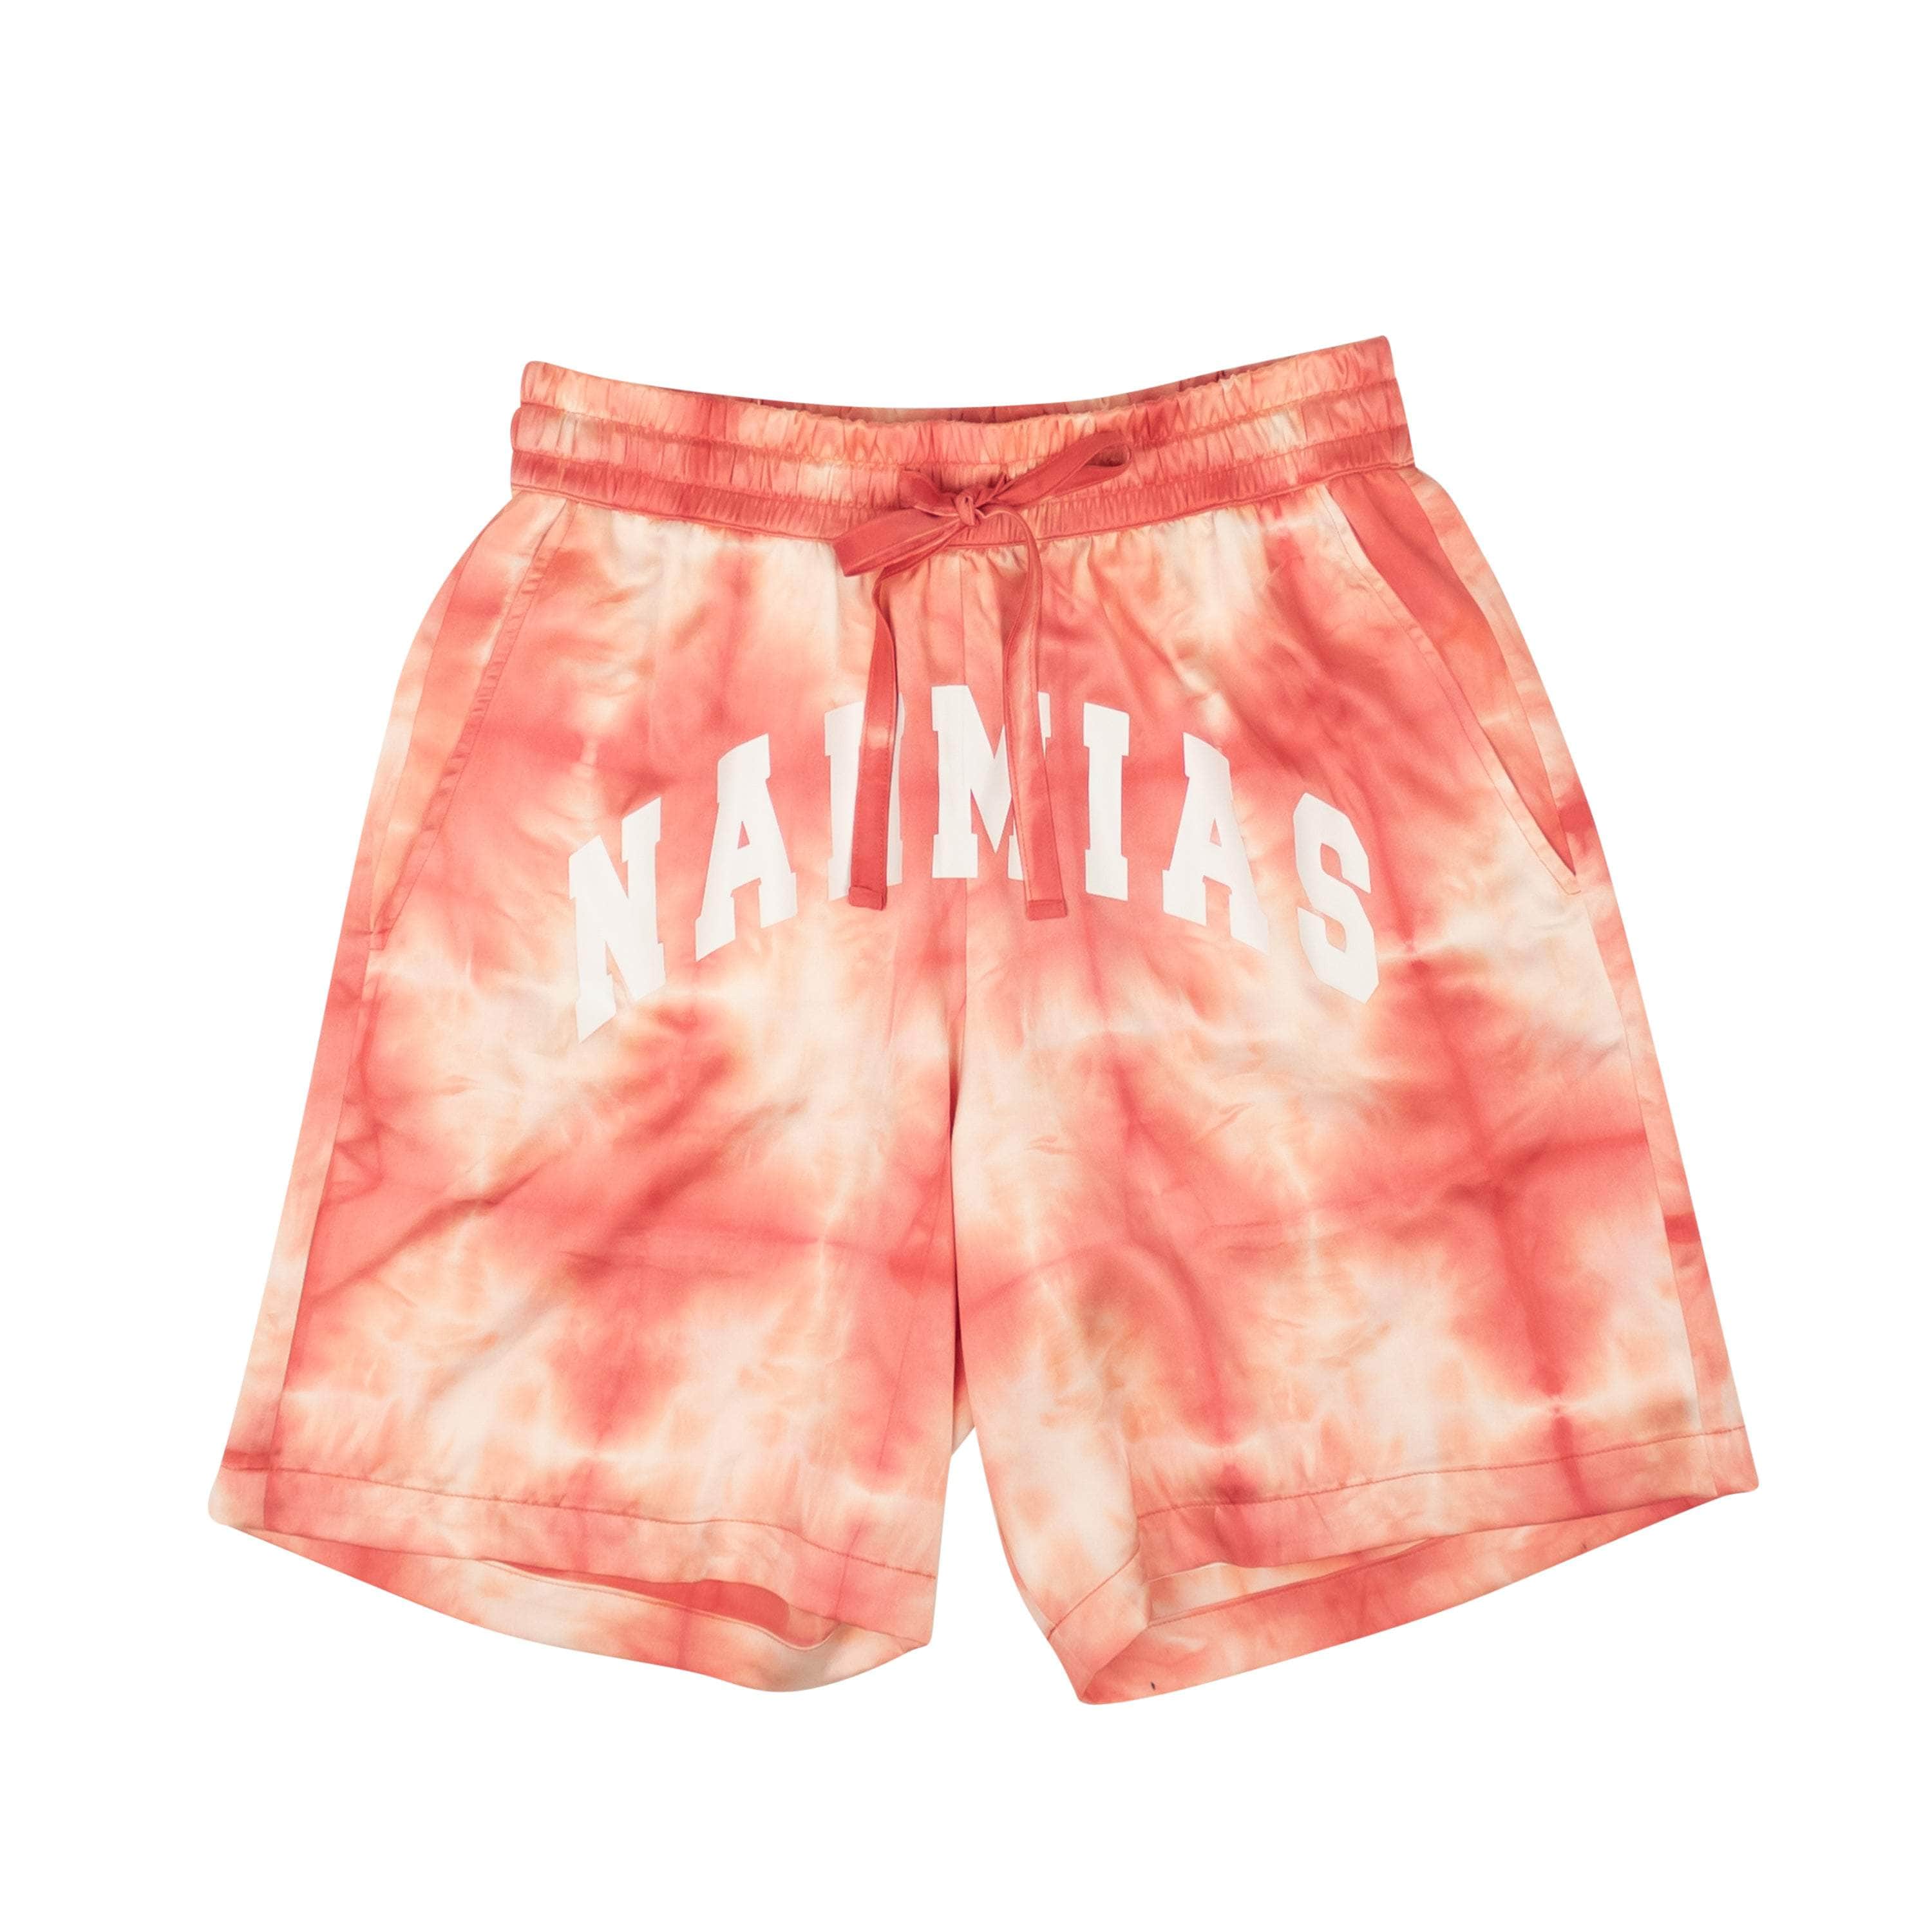 Nahmias channelenable-all, chicmi, couponcollection, gender-mens, main-clothing, mens-shoes, nahmias, size-l, size-m, size-s, size-xl, size-xxl, under-250 Red And White Graphic Logo Silk Shorts